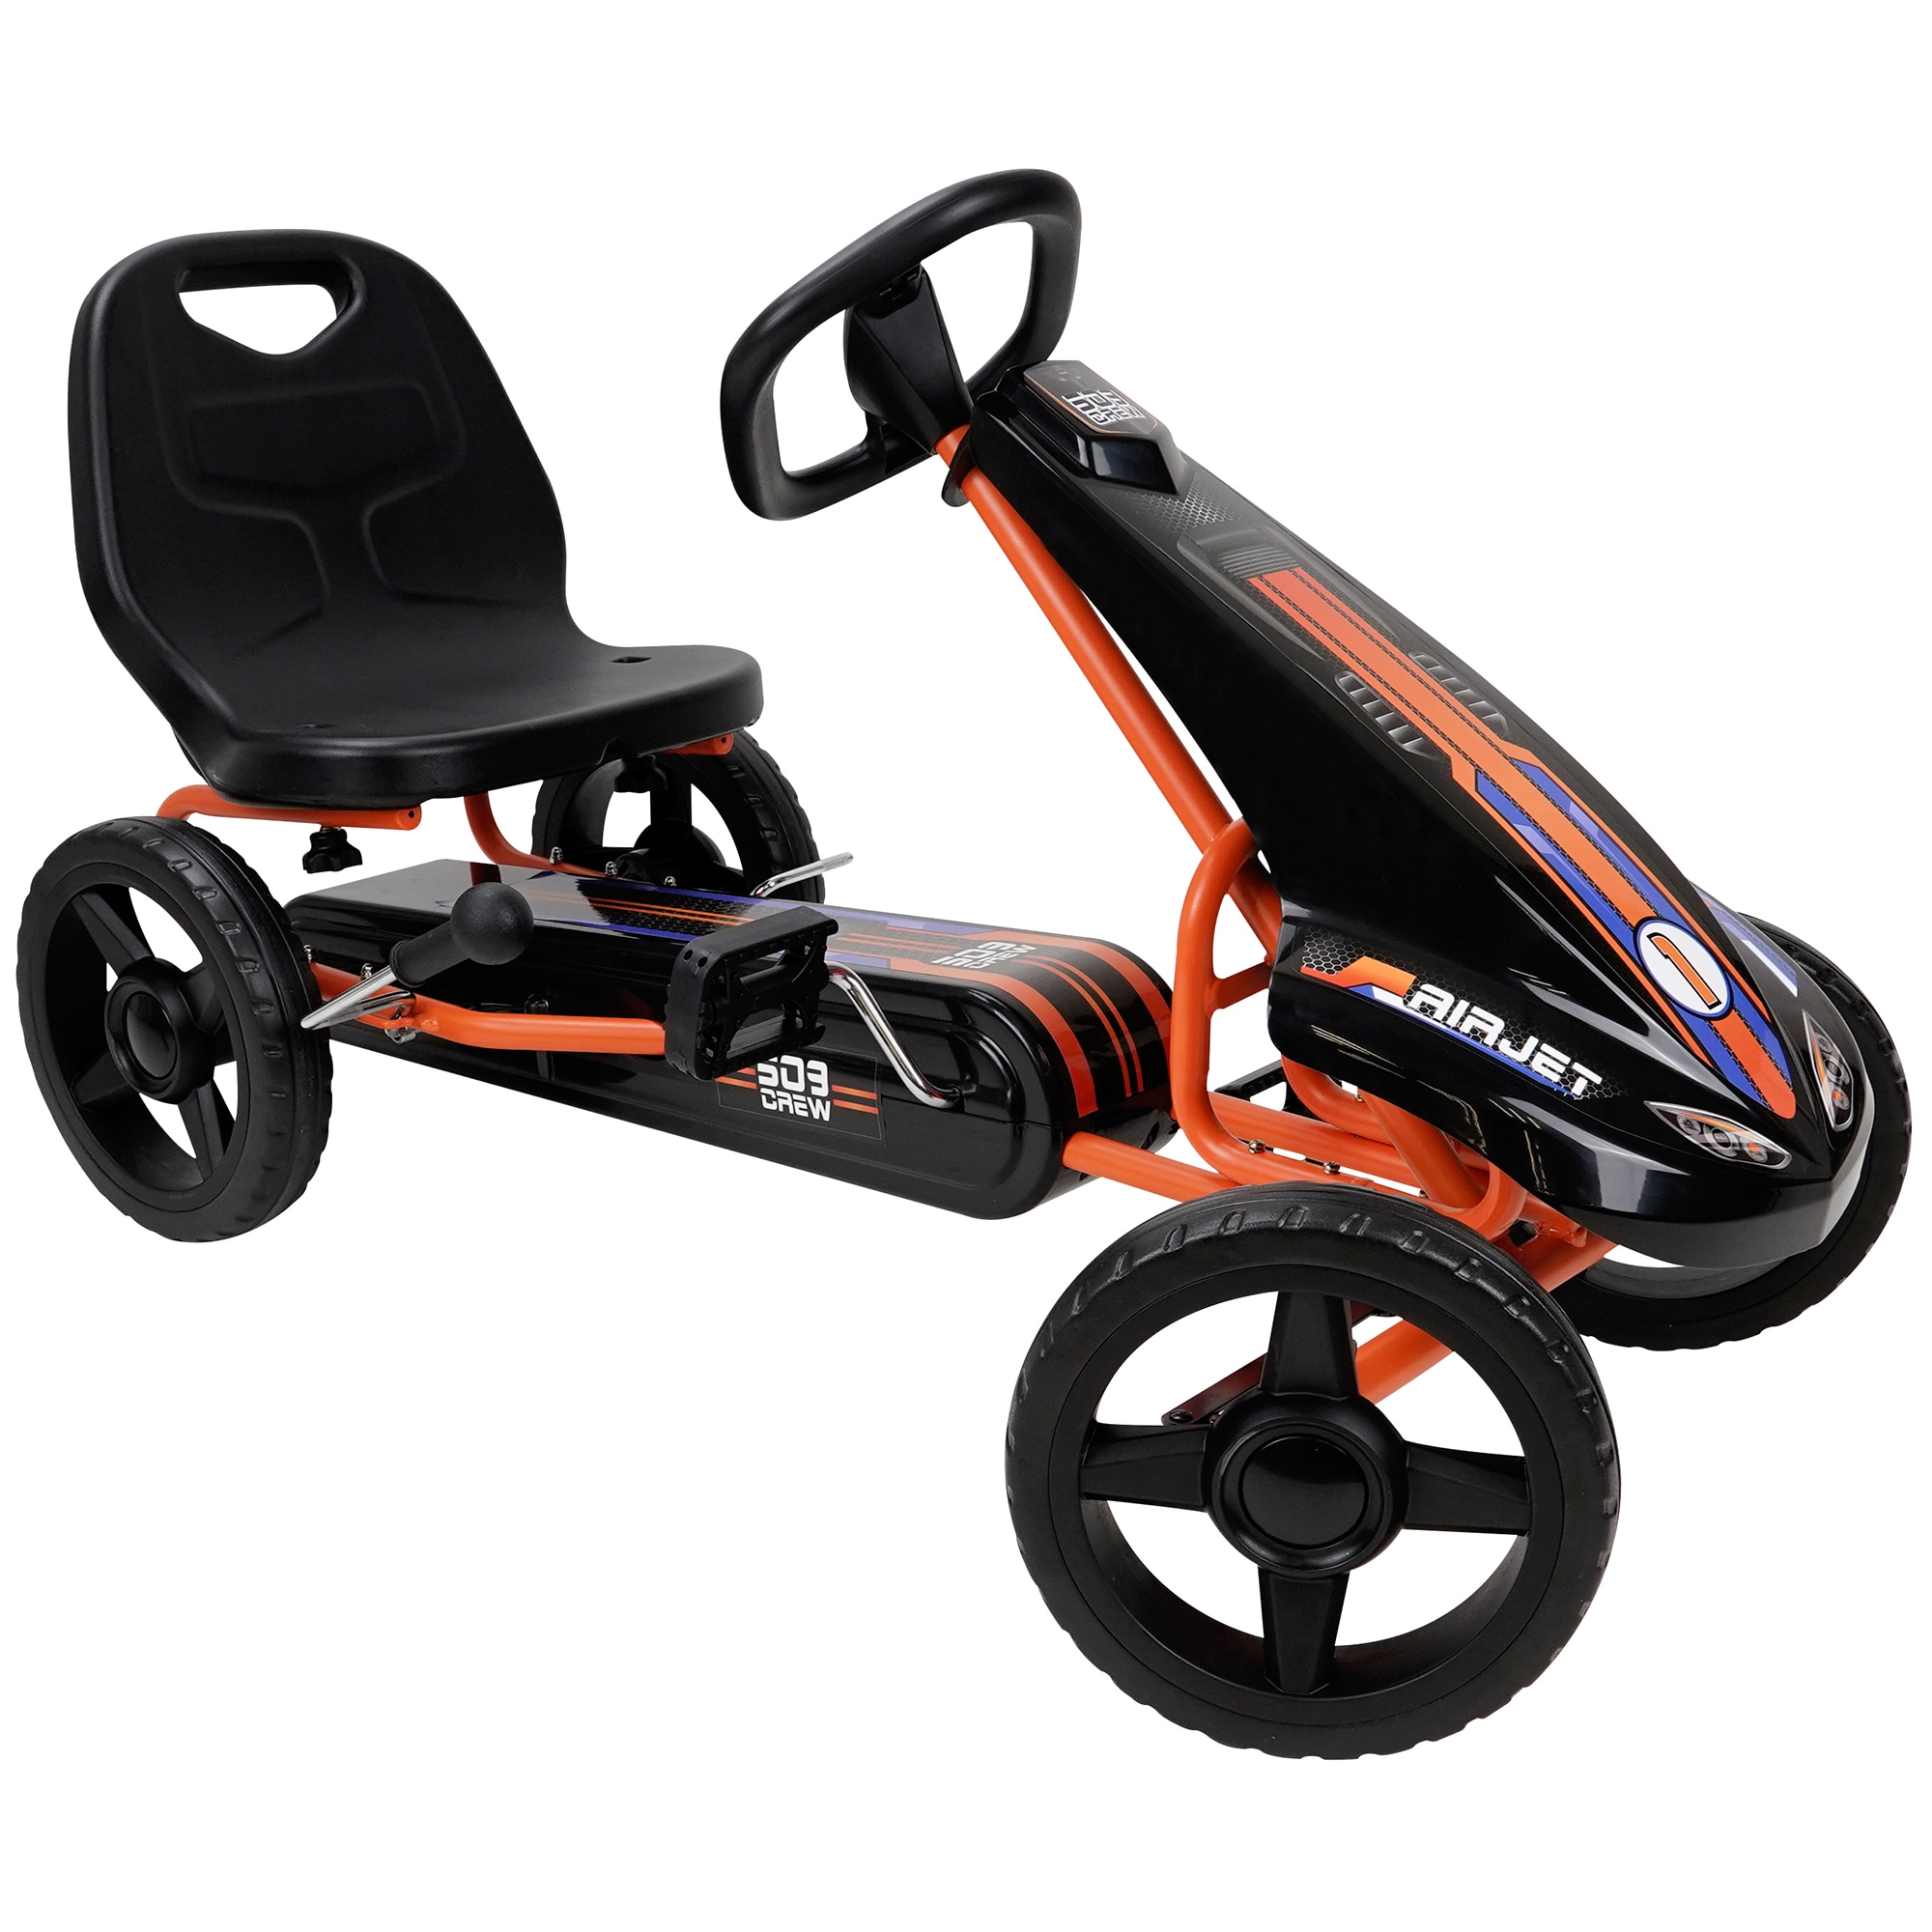 509 Crew Air Jet Pedal Go Kart with Sporty Graphics- Orange in the